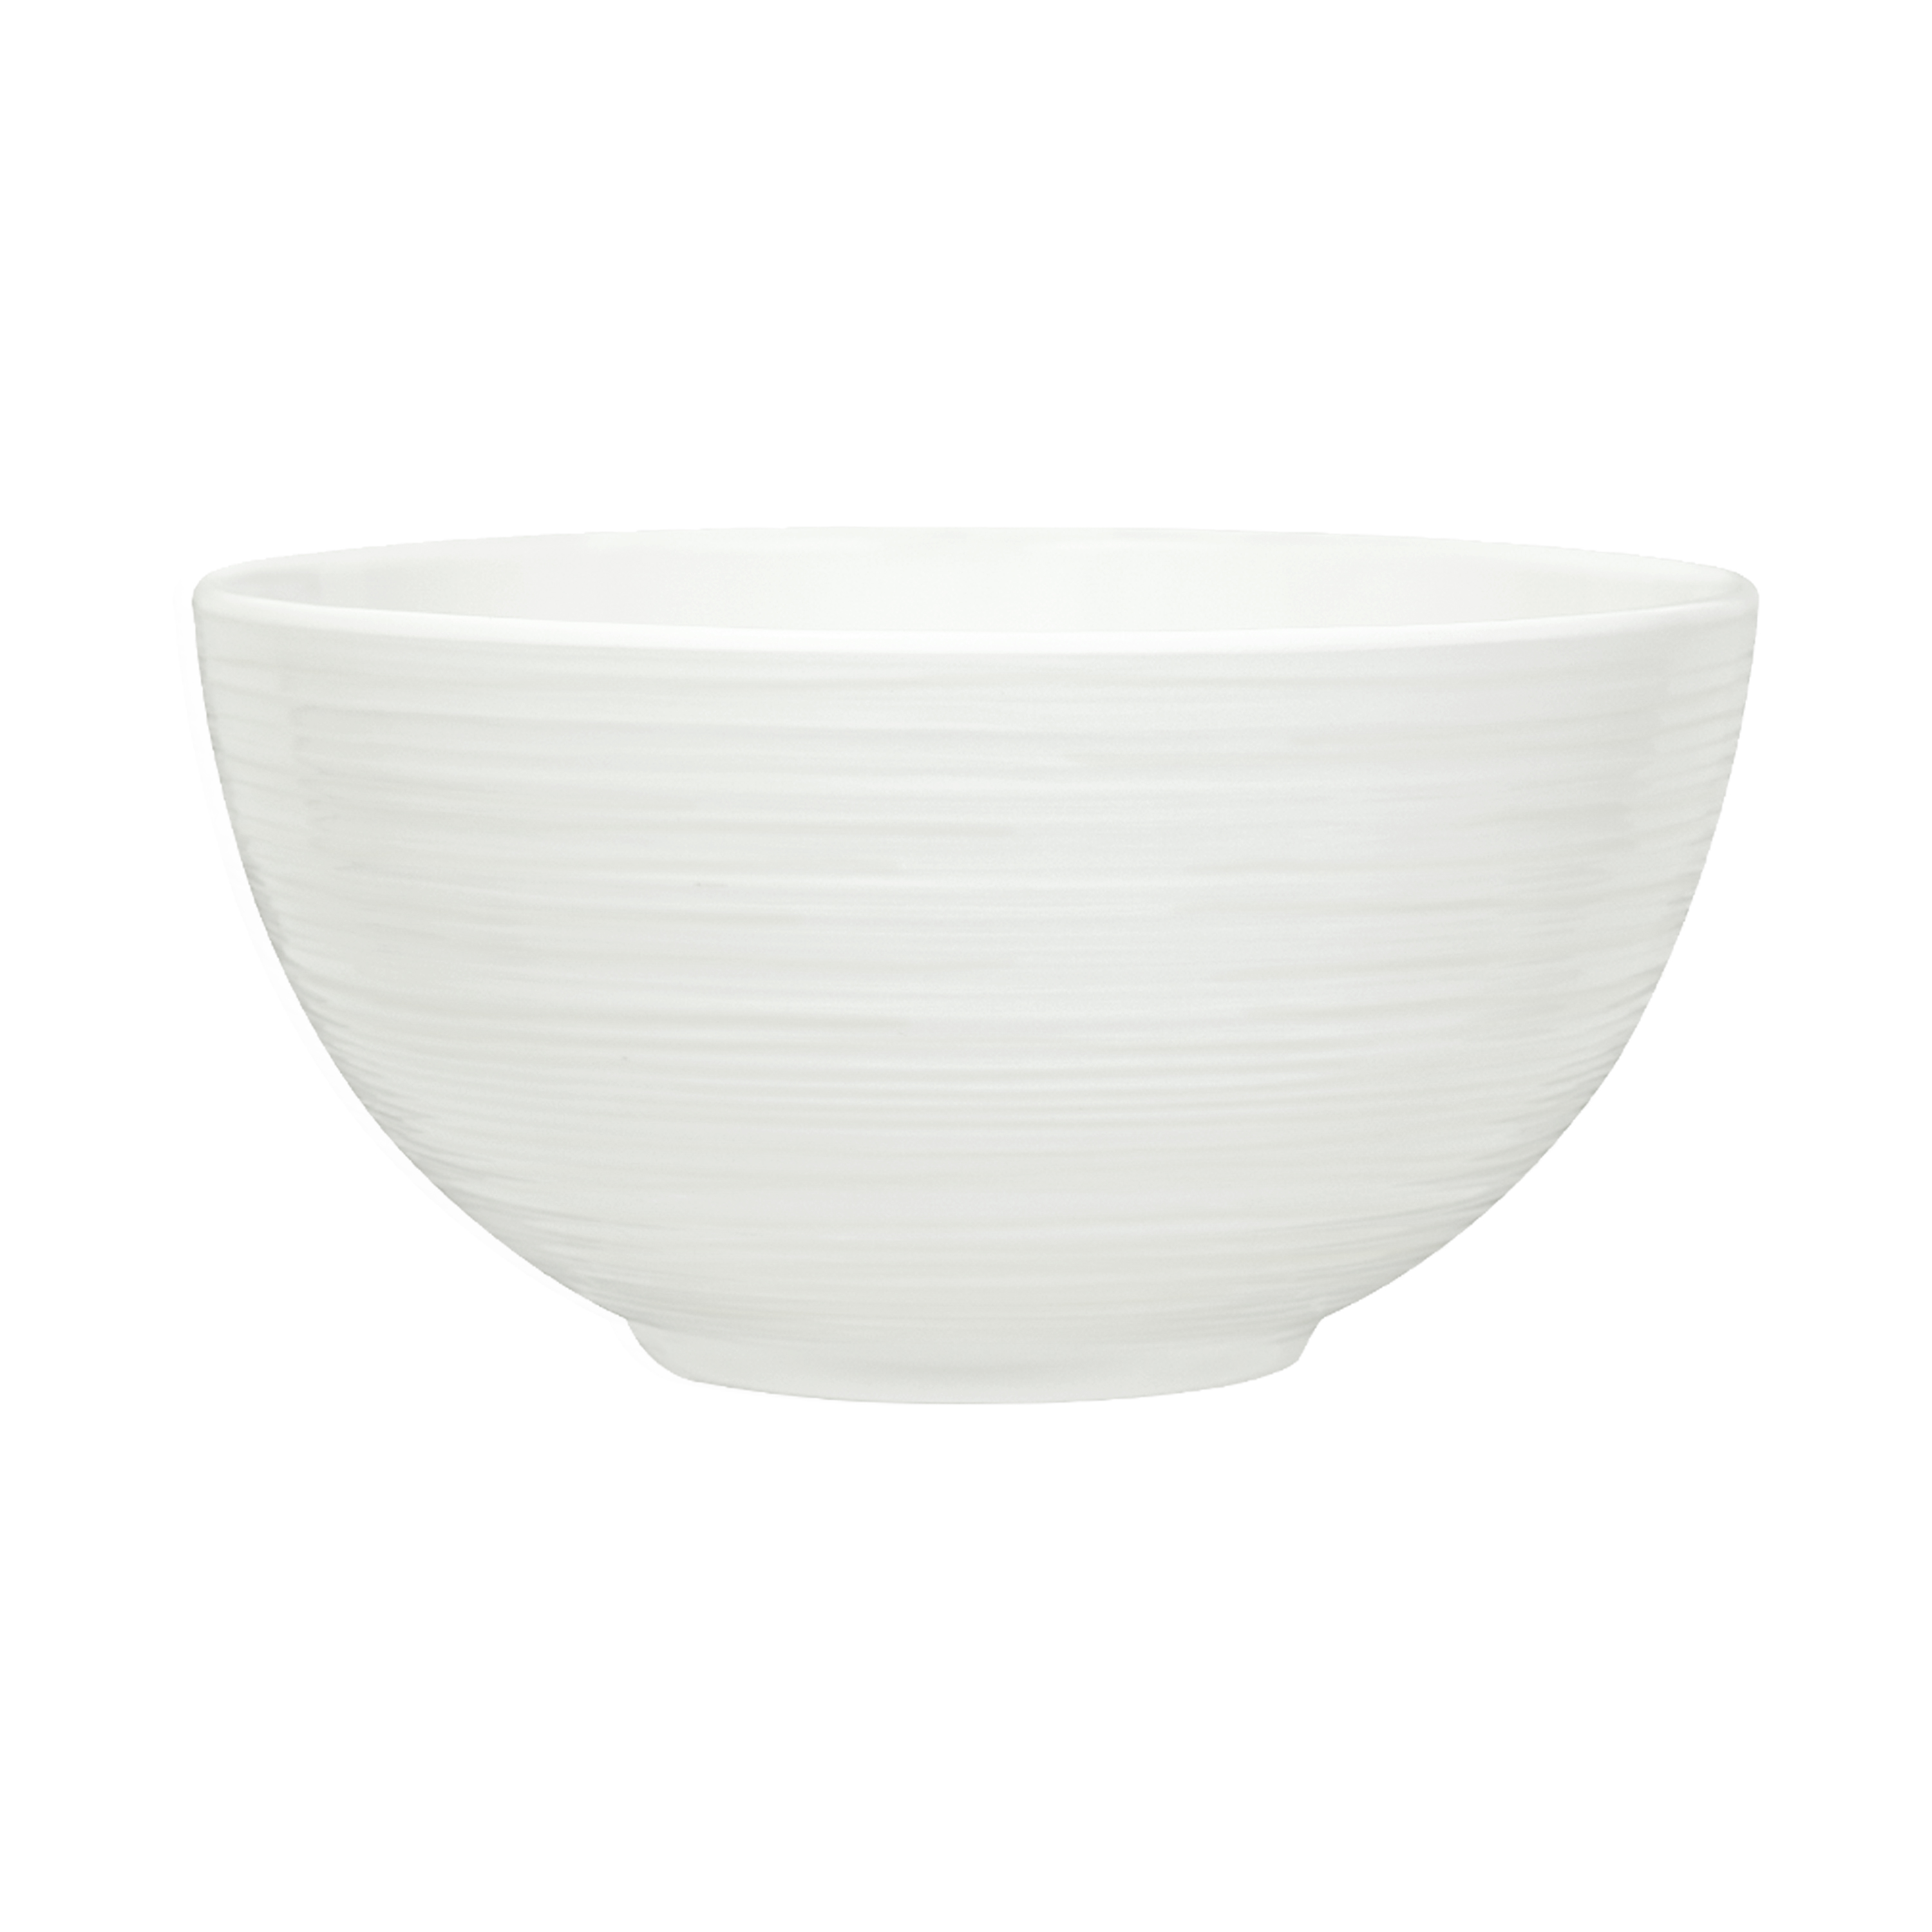 American Conventional Plate & Bowl Sets, White, 12-piece set slideshow image 2